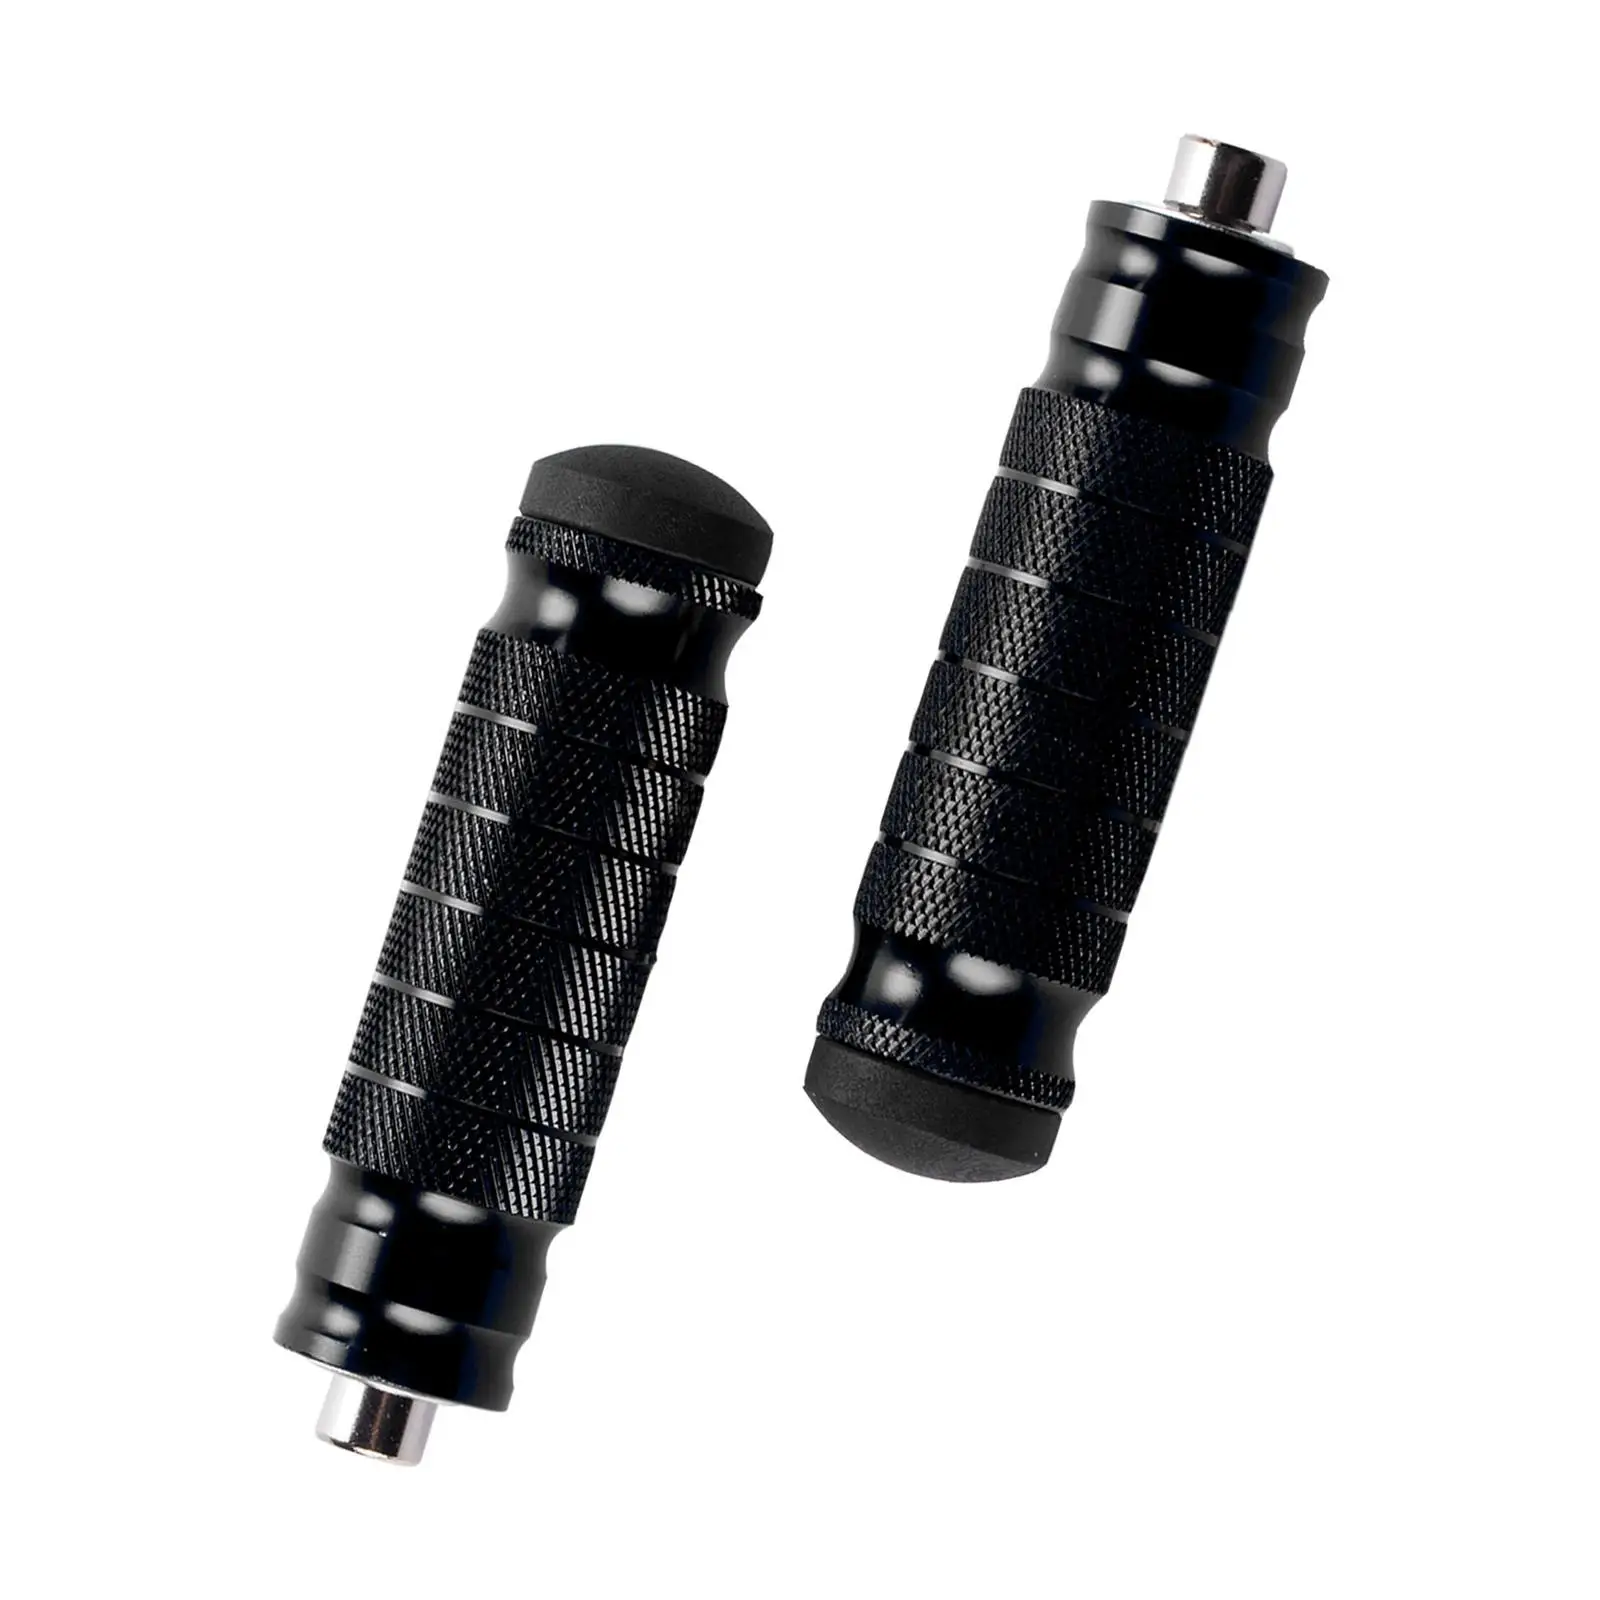 2 Pieces Motorcycle Rear Footrests 8mm Bolts Anti Slip Easy Installation Accessories Replace Parts Aluminum Passenger Foot Rest